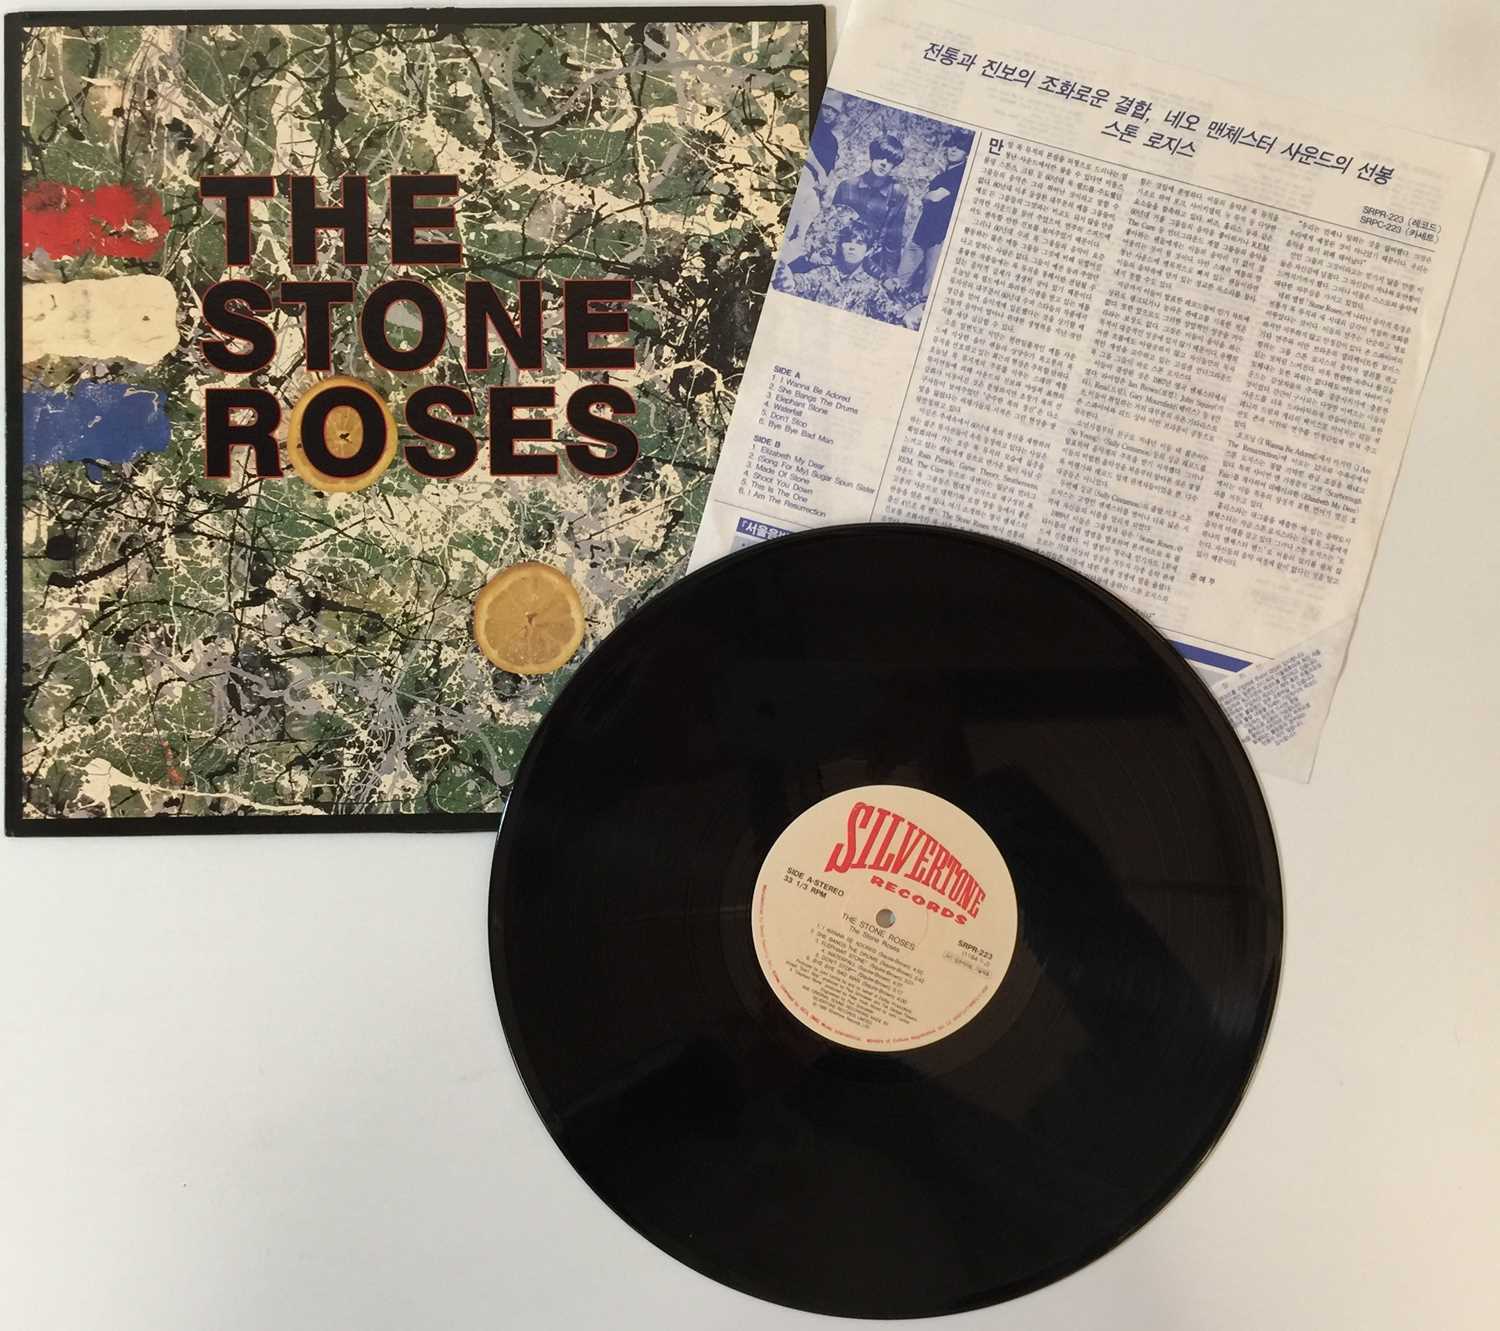 THE STONE ROSES - THE STONE ROSES LPs (LIMITED EDITION UK/EU REISSUES) - Image 5 of 8